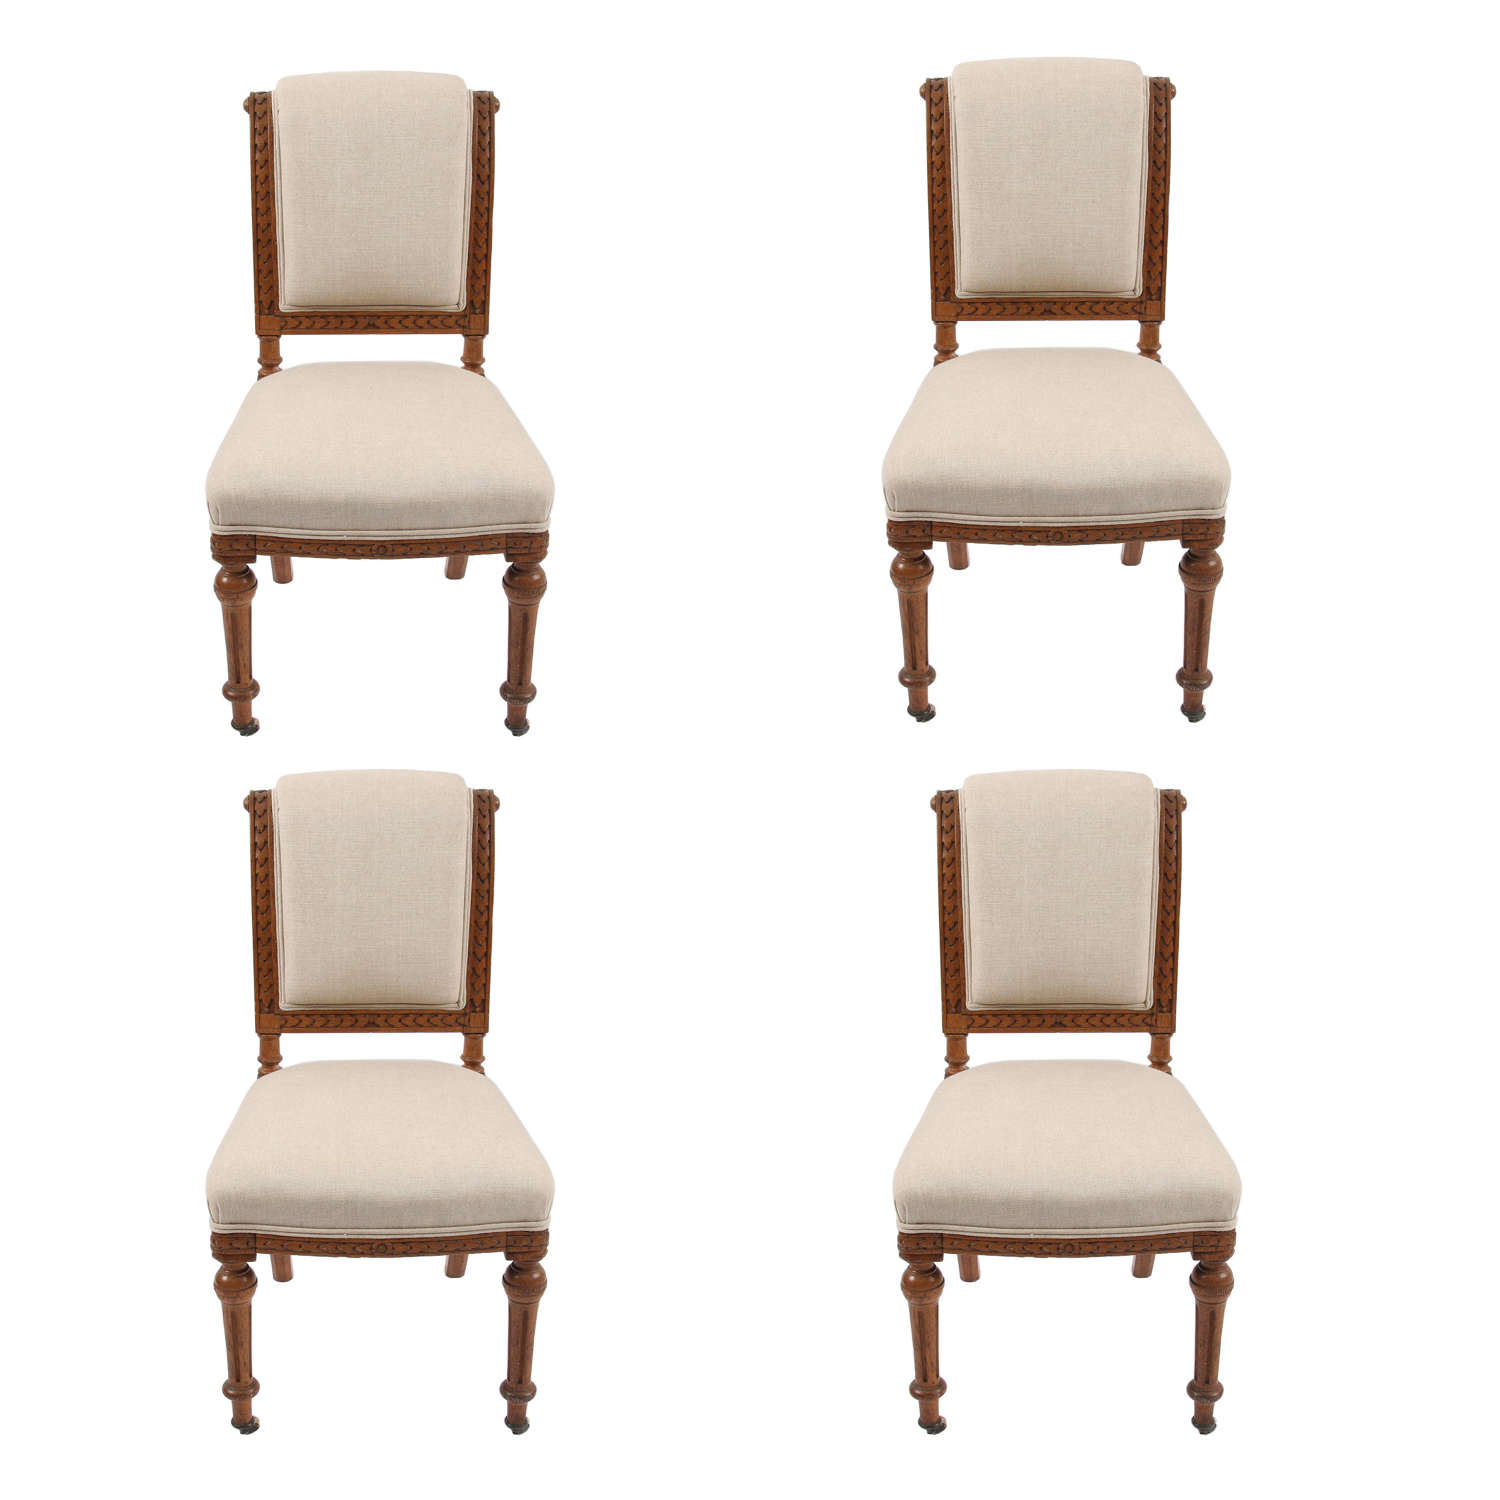 Set of 4 Oak Dining Chairs